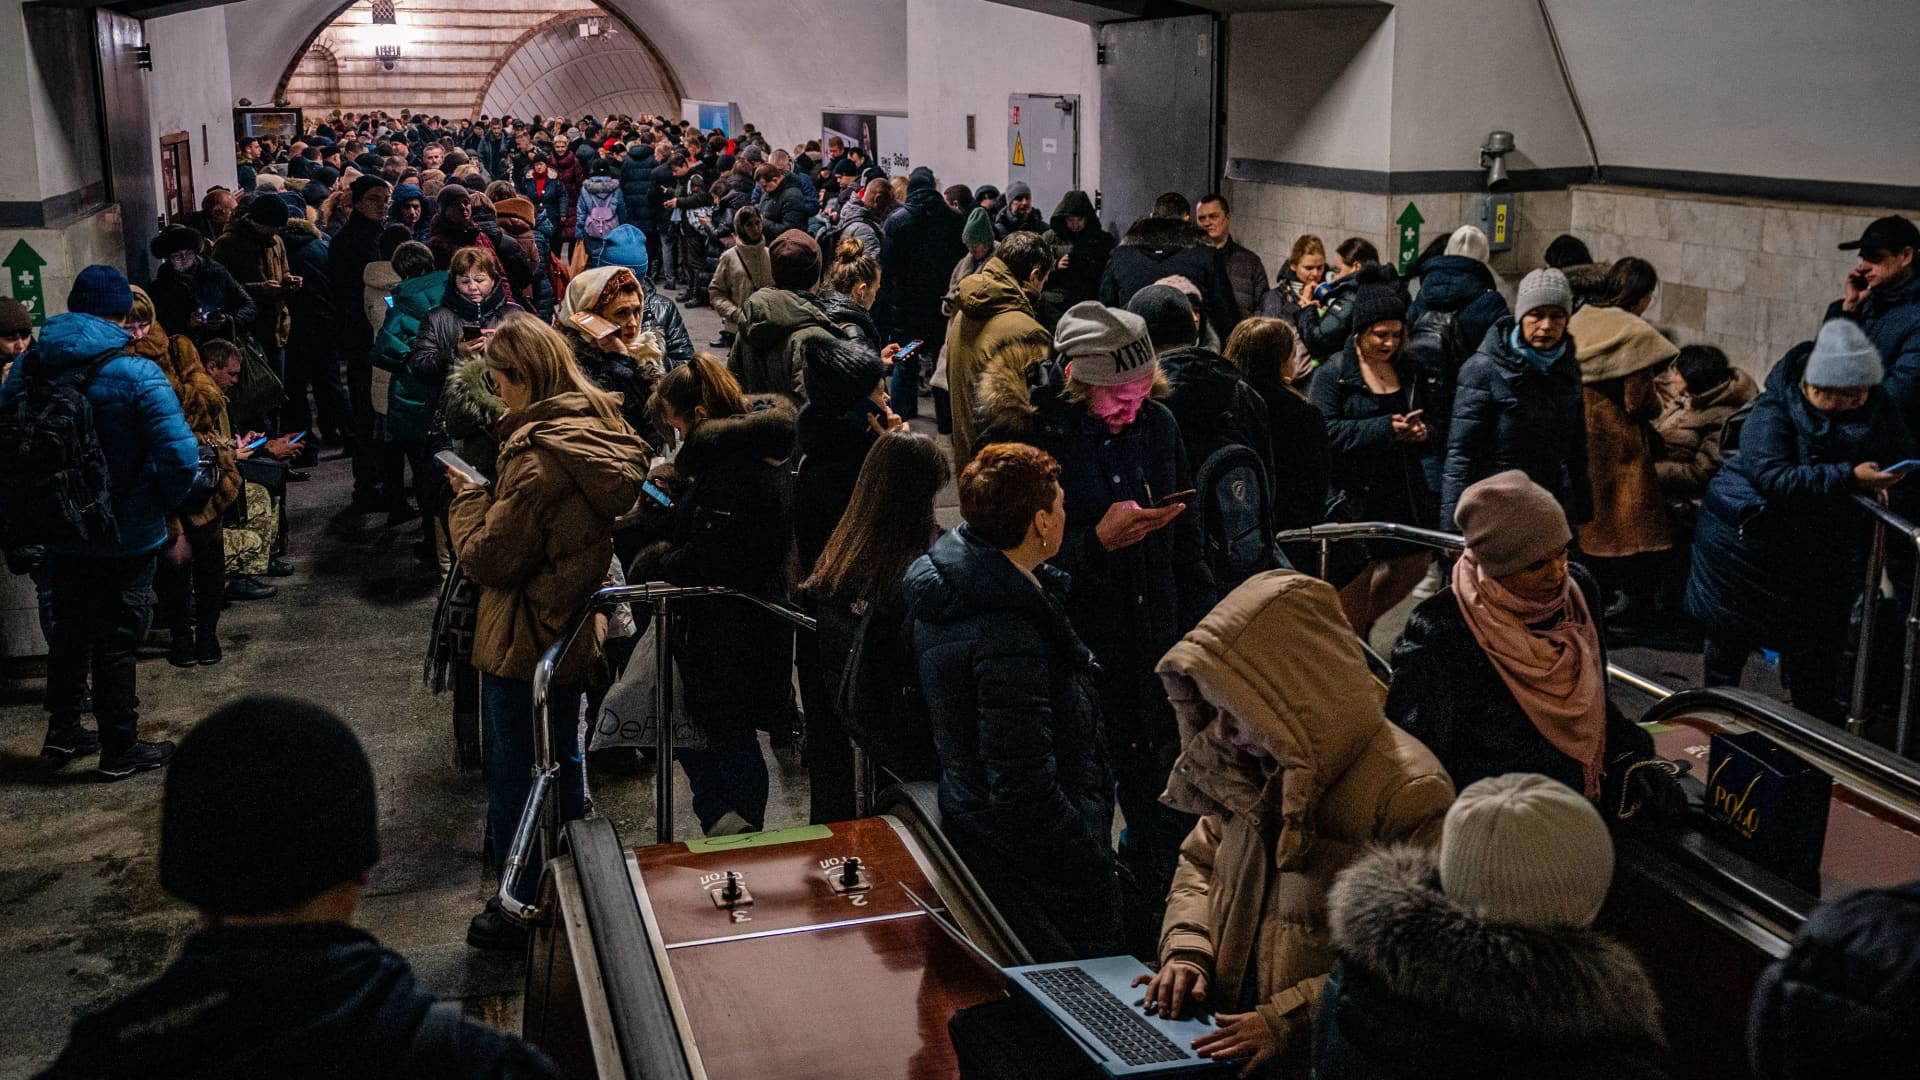 Civilians sit on an escalator while take shelter inside a metro station during an air raid alert in the centre of Kyiv on December 16, 2022, amid the Russian invasion of Ukraine.